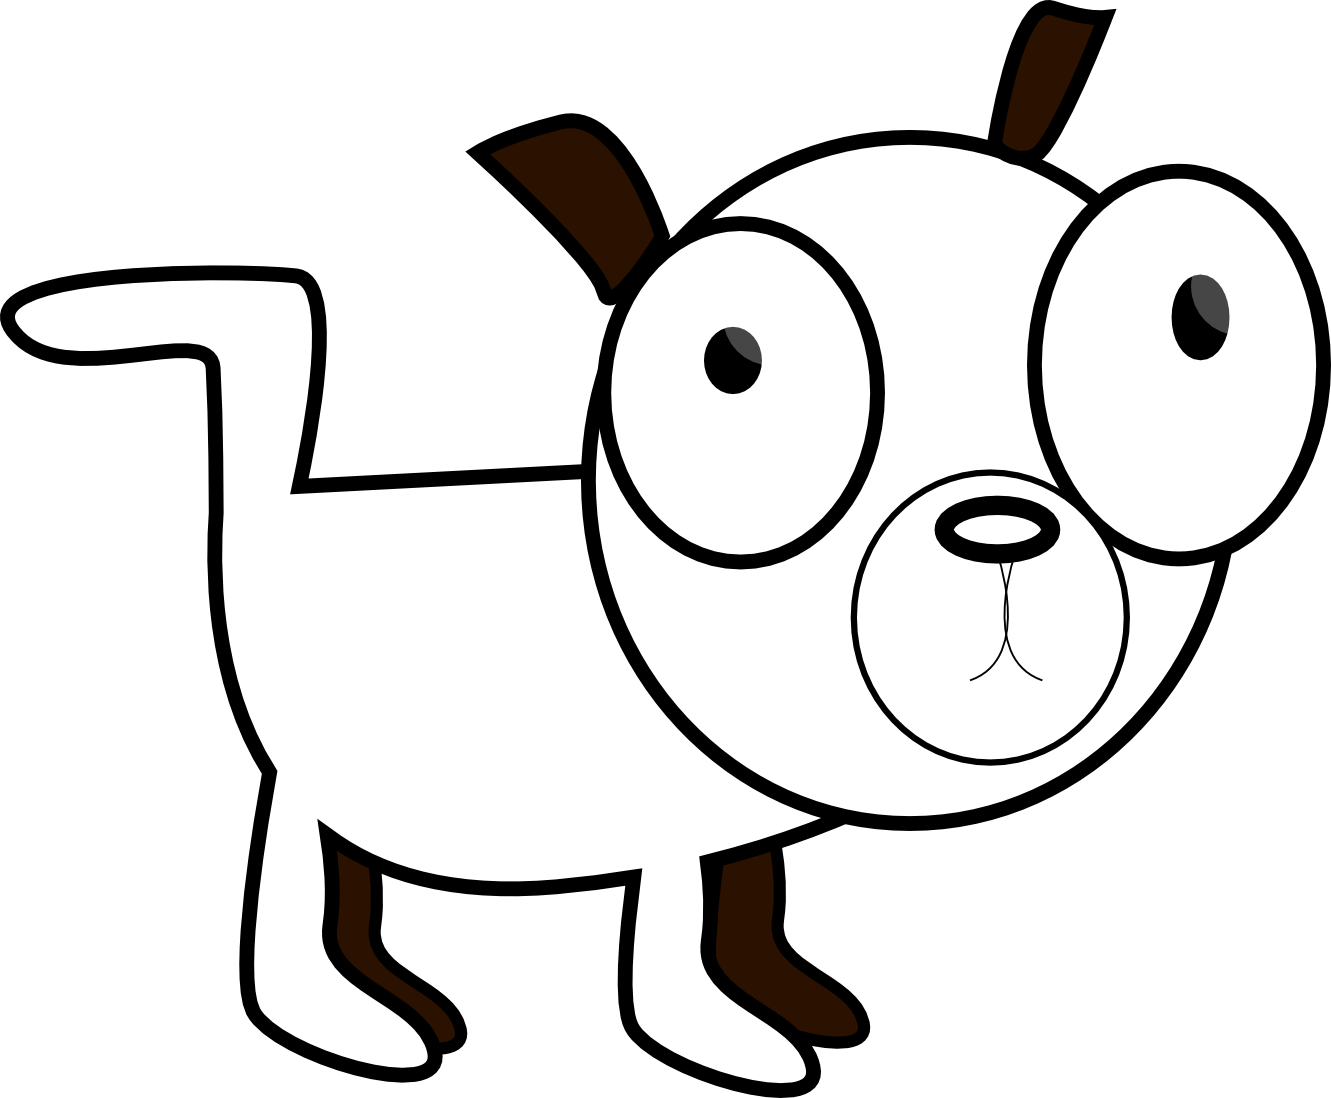 dog simple drawing 5 black wh